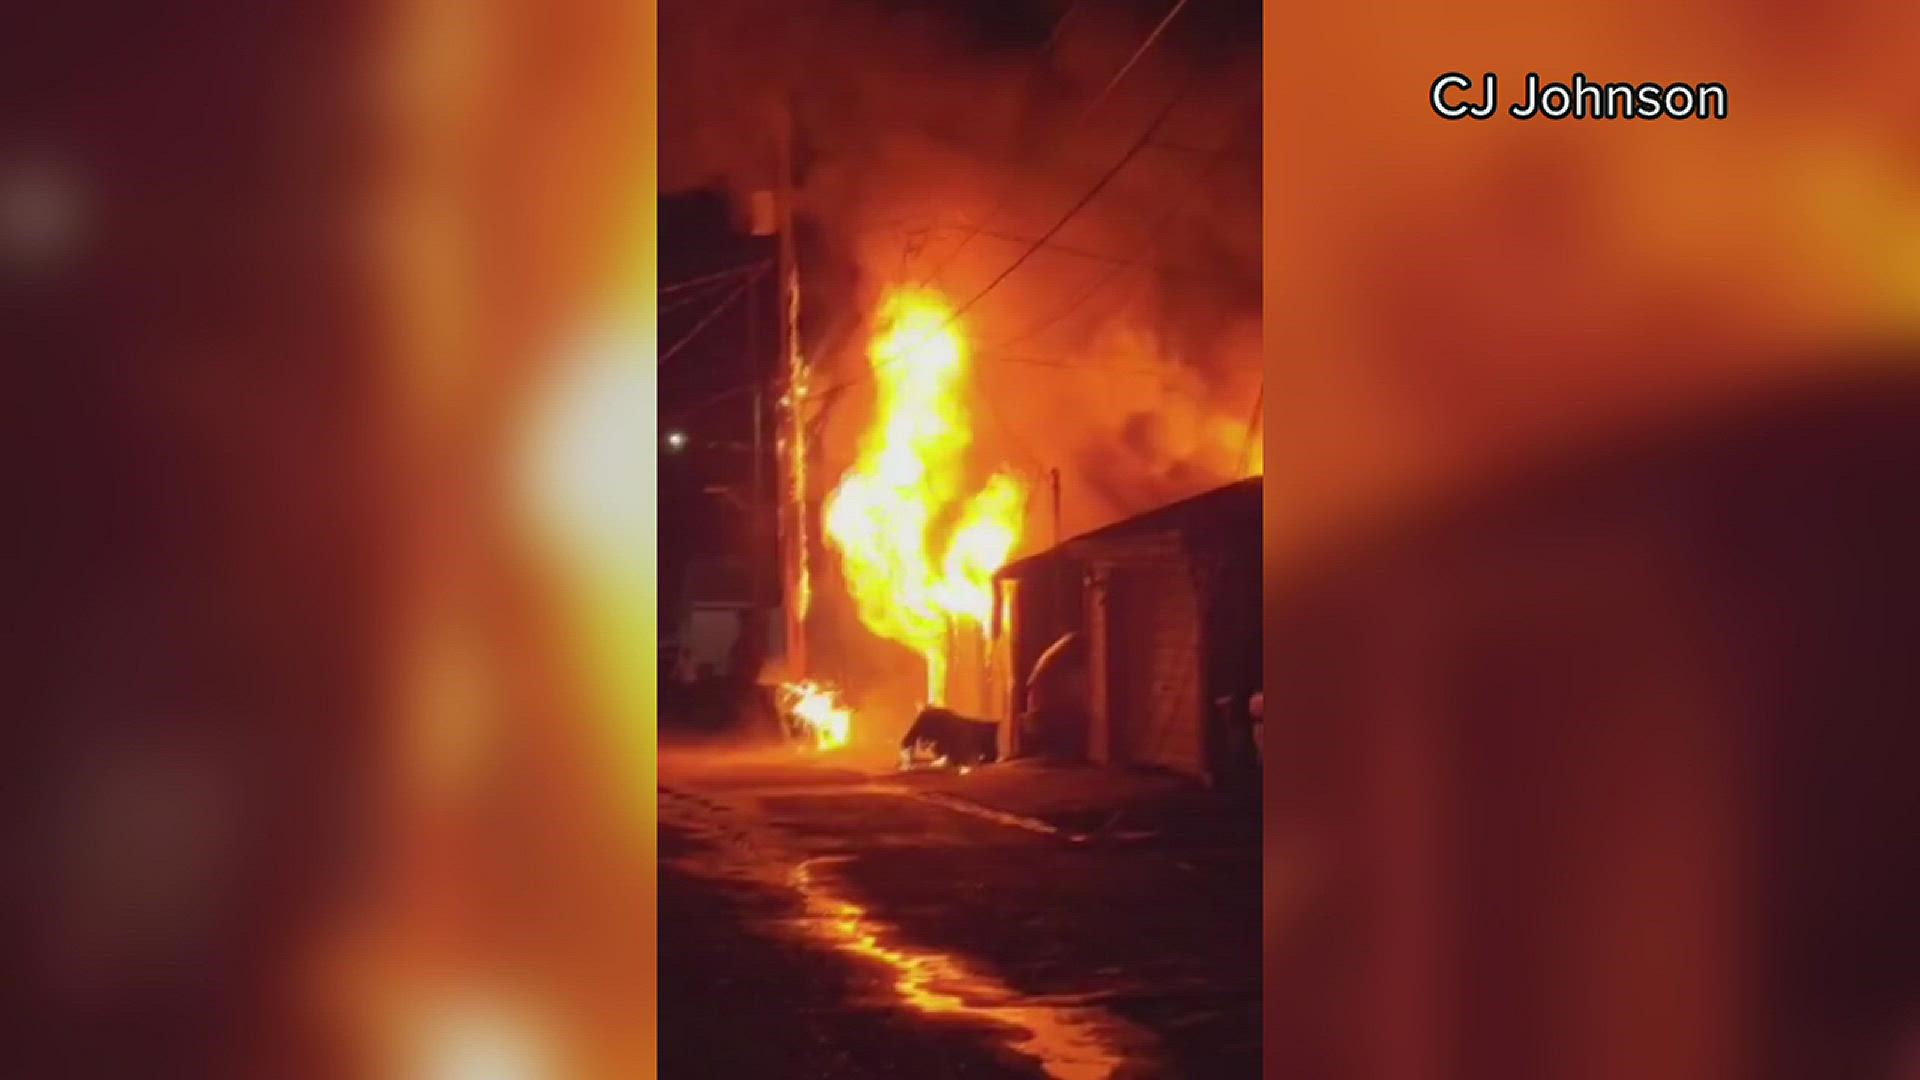 WQAD viewer CJ Johnson sent in video of a garage fire that damaged multiple structures in Moline on Sunday Feb. 5.